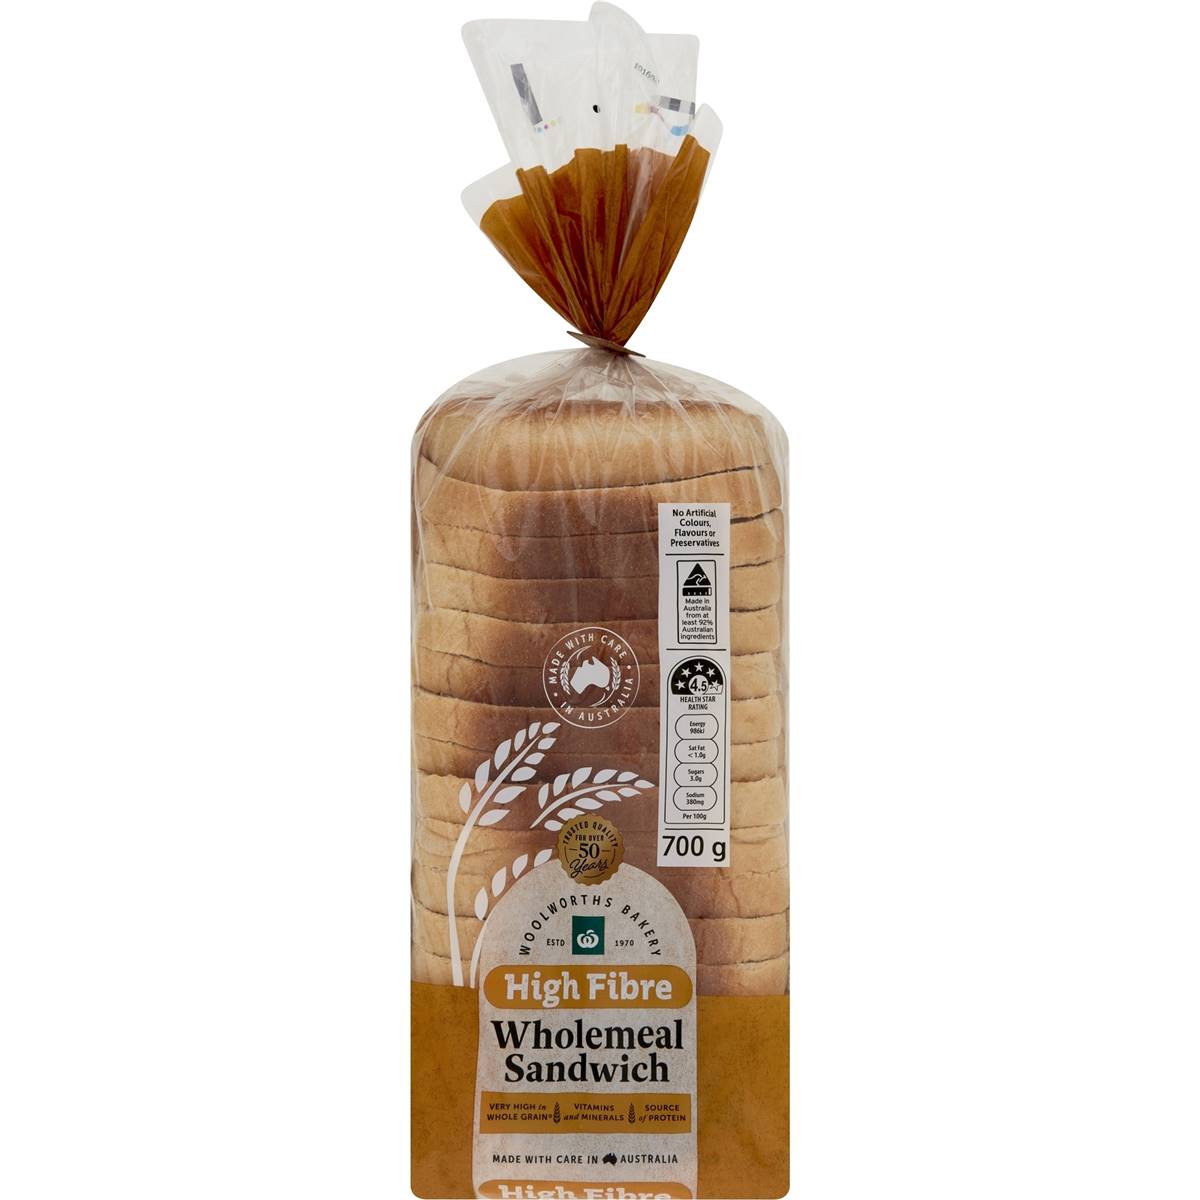 Calories in Woolworths Wholemeal Sandwich Hi-fibre Bread